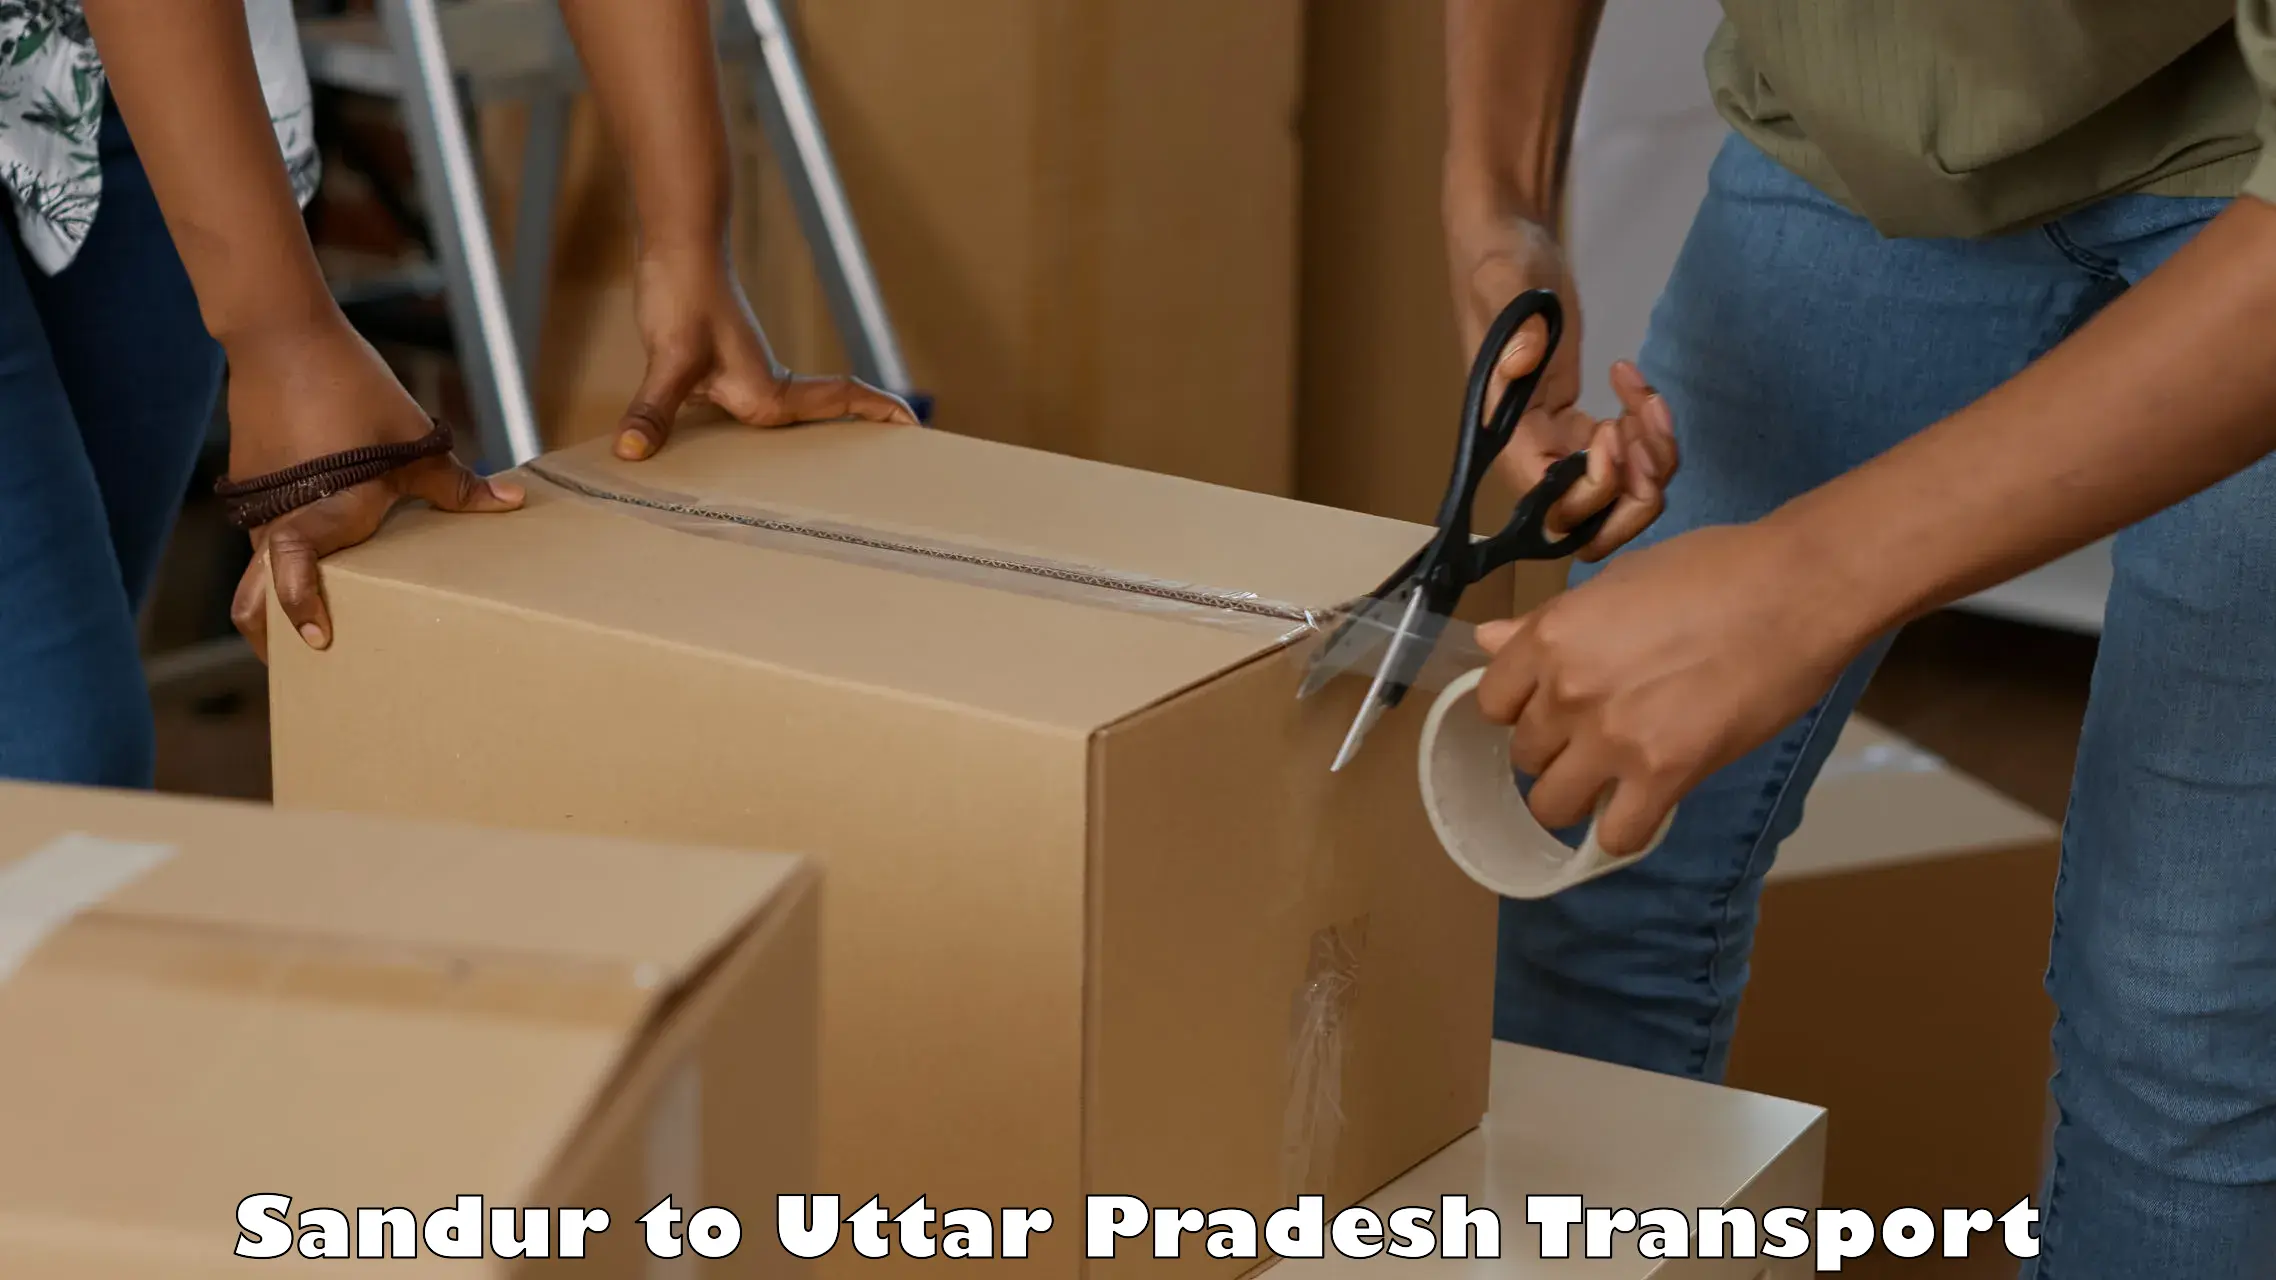 Container transport service Sandur to Lucknow